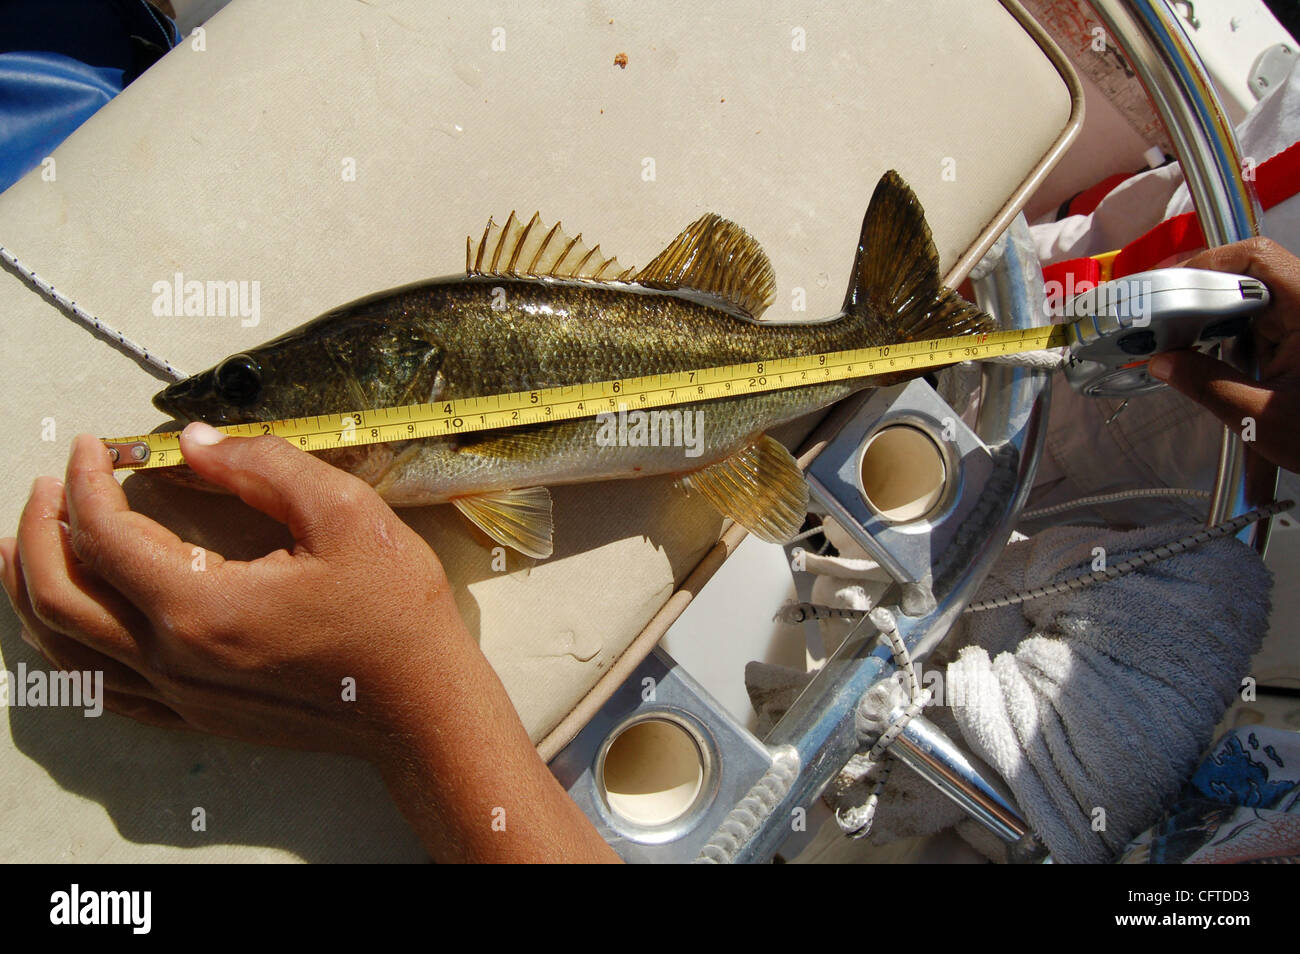 1/7/07: Measuring largemouth bass is important when fishing at the  Loxahatchee National Wildlife Refuge and other parts of South Florida,  where the five-bass daily bag limit can include only one bass that